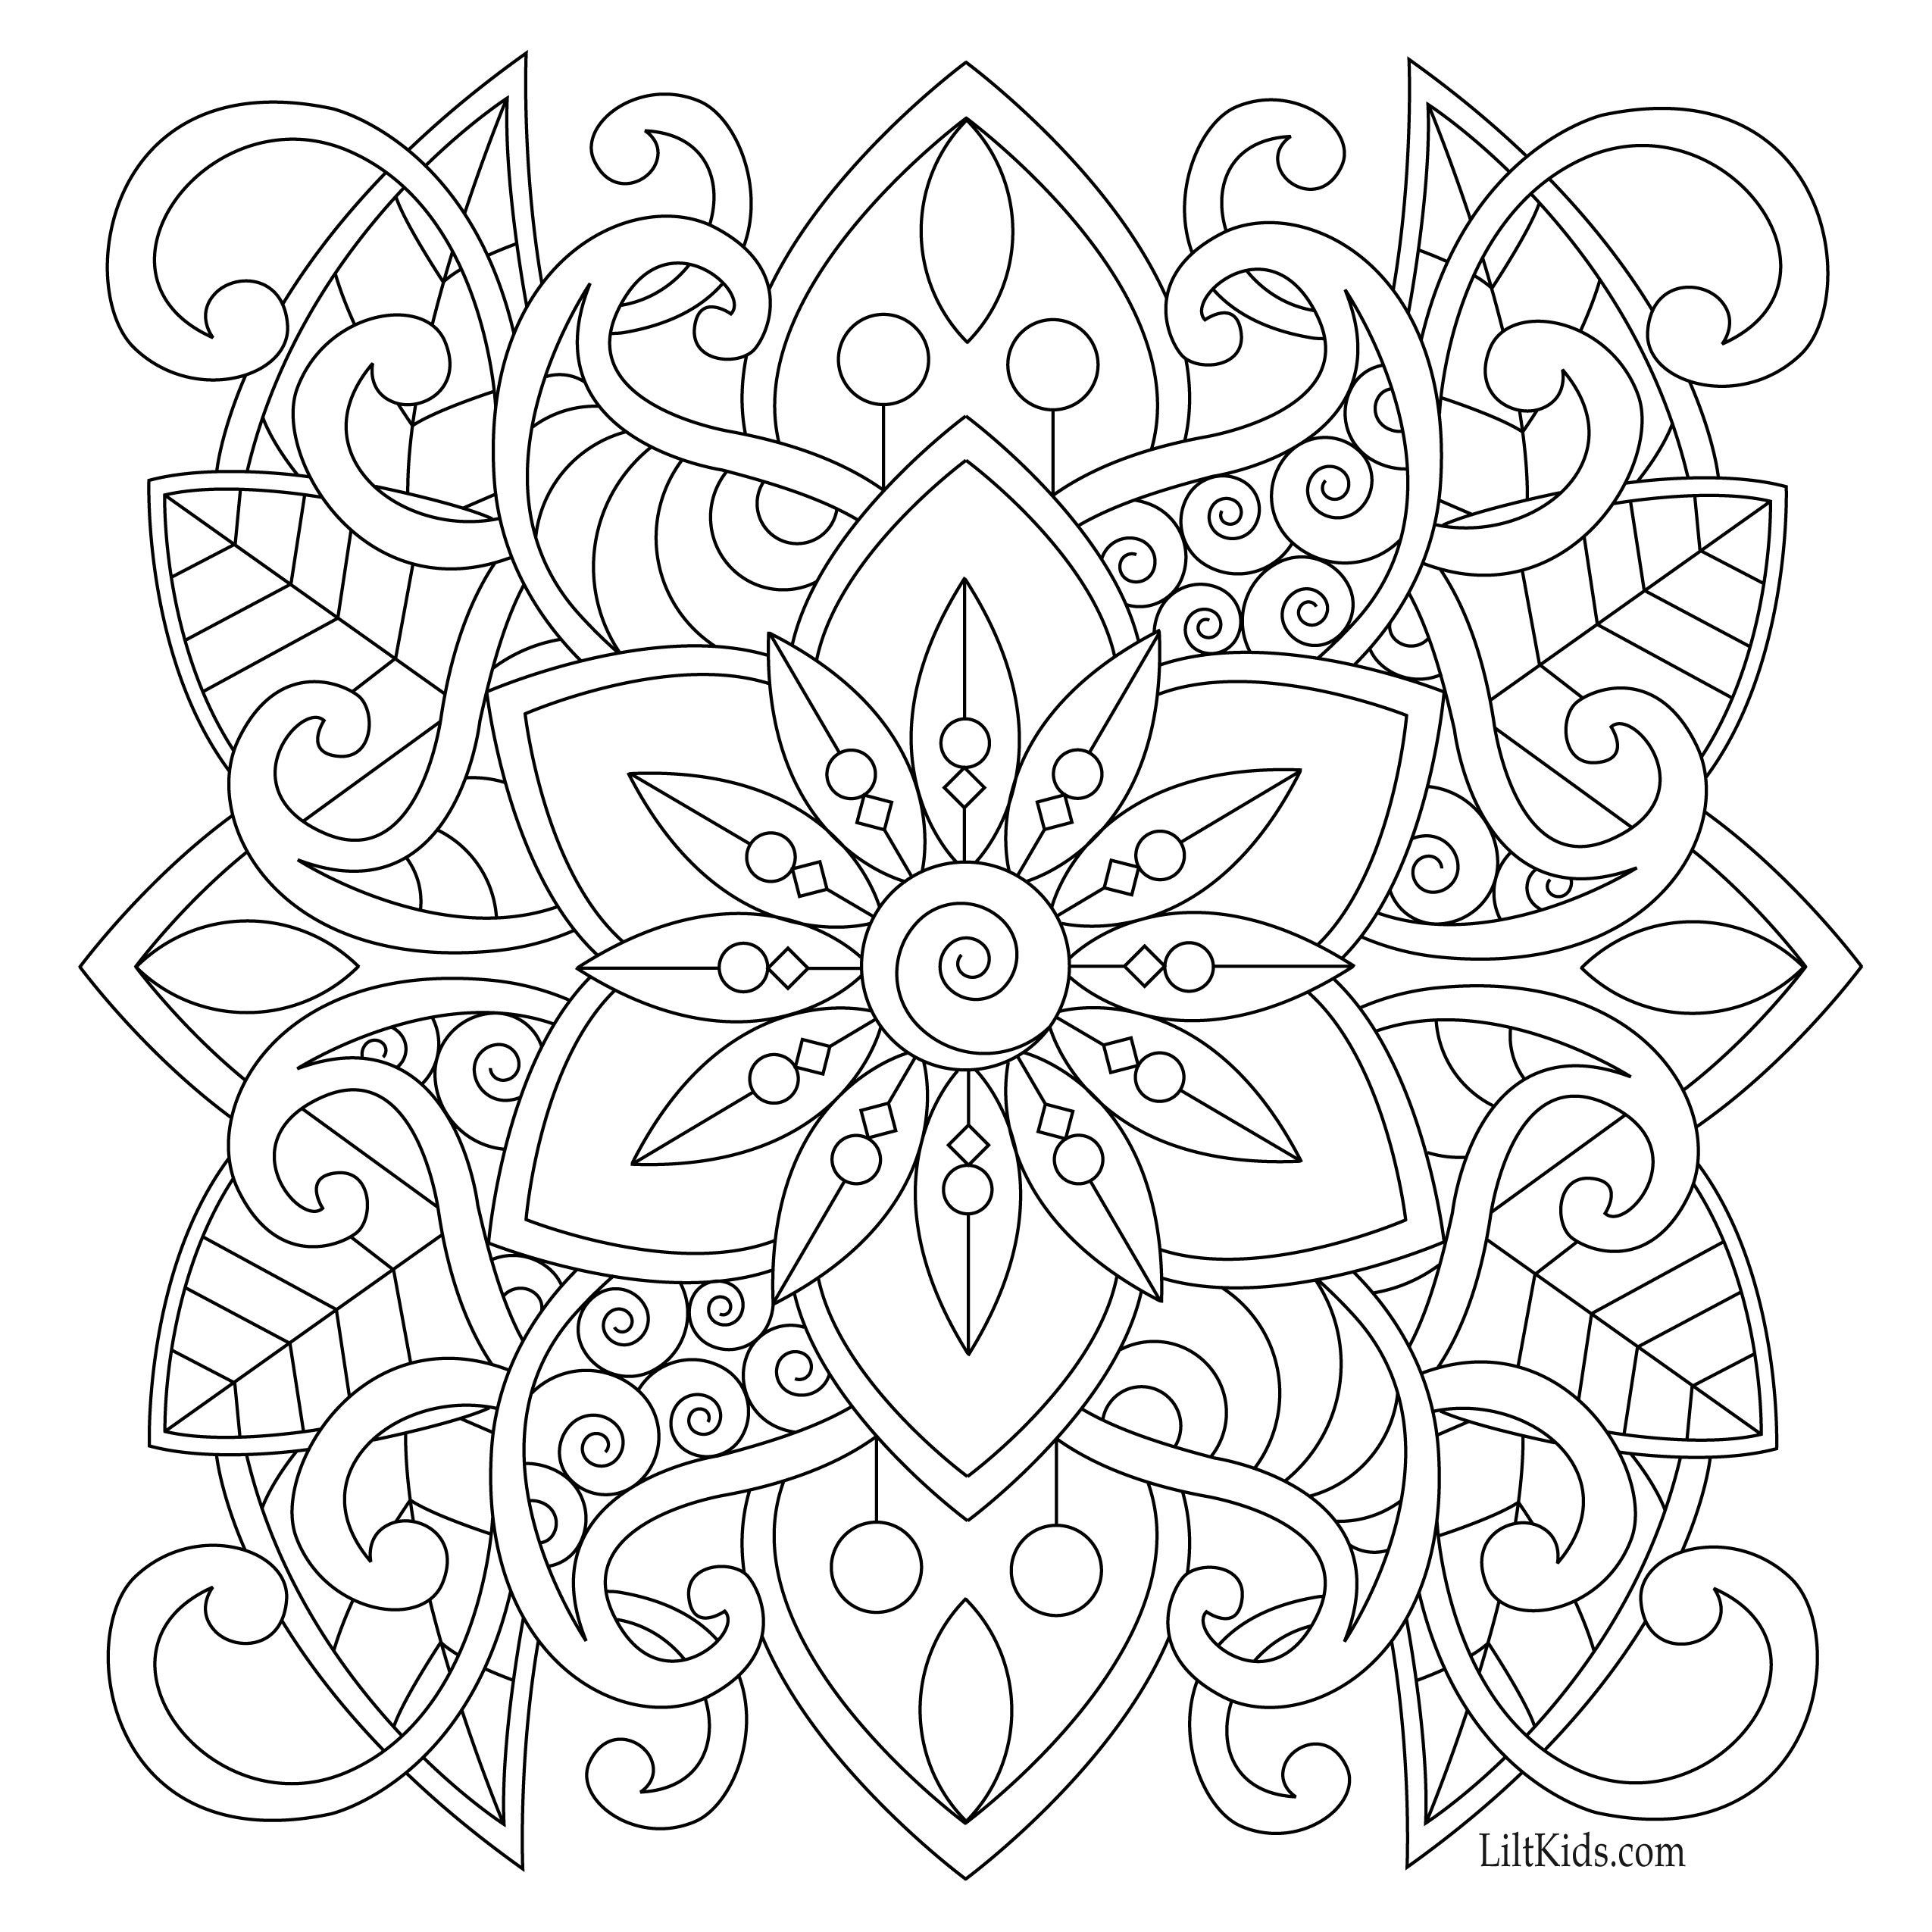 Coloring Pages For Adults Easy
 Free easy mandala for beginners adult coloring book image